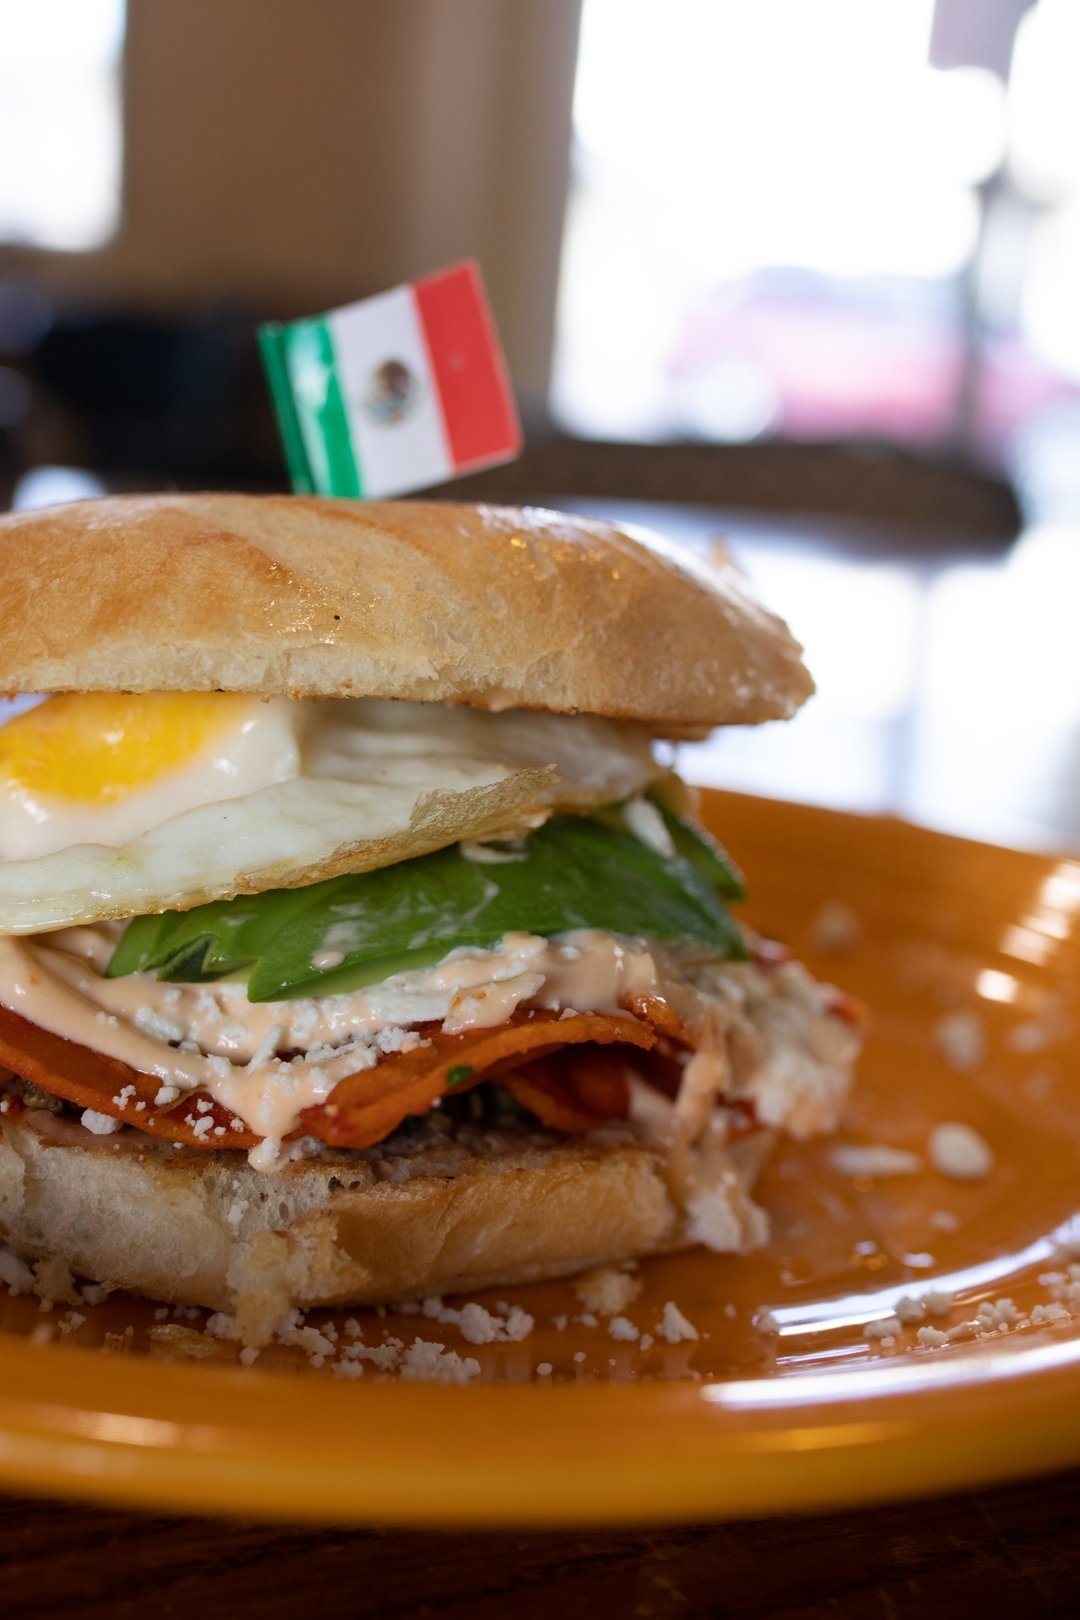 Piled high with the flavors of Mexico, come and try one of our newest additions- The Breakfast Torta! 
Chilaquiles in salsa roja, your choice of meat, chipotle mayo, avocado, queso fresco and a fried egg! 🥚🌵